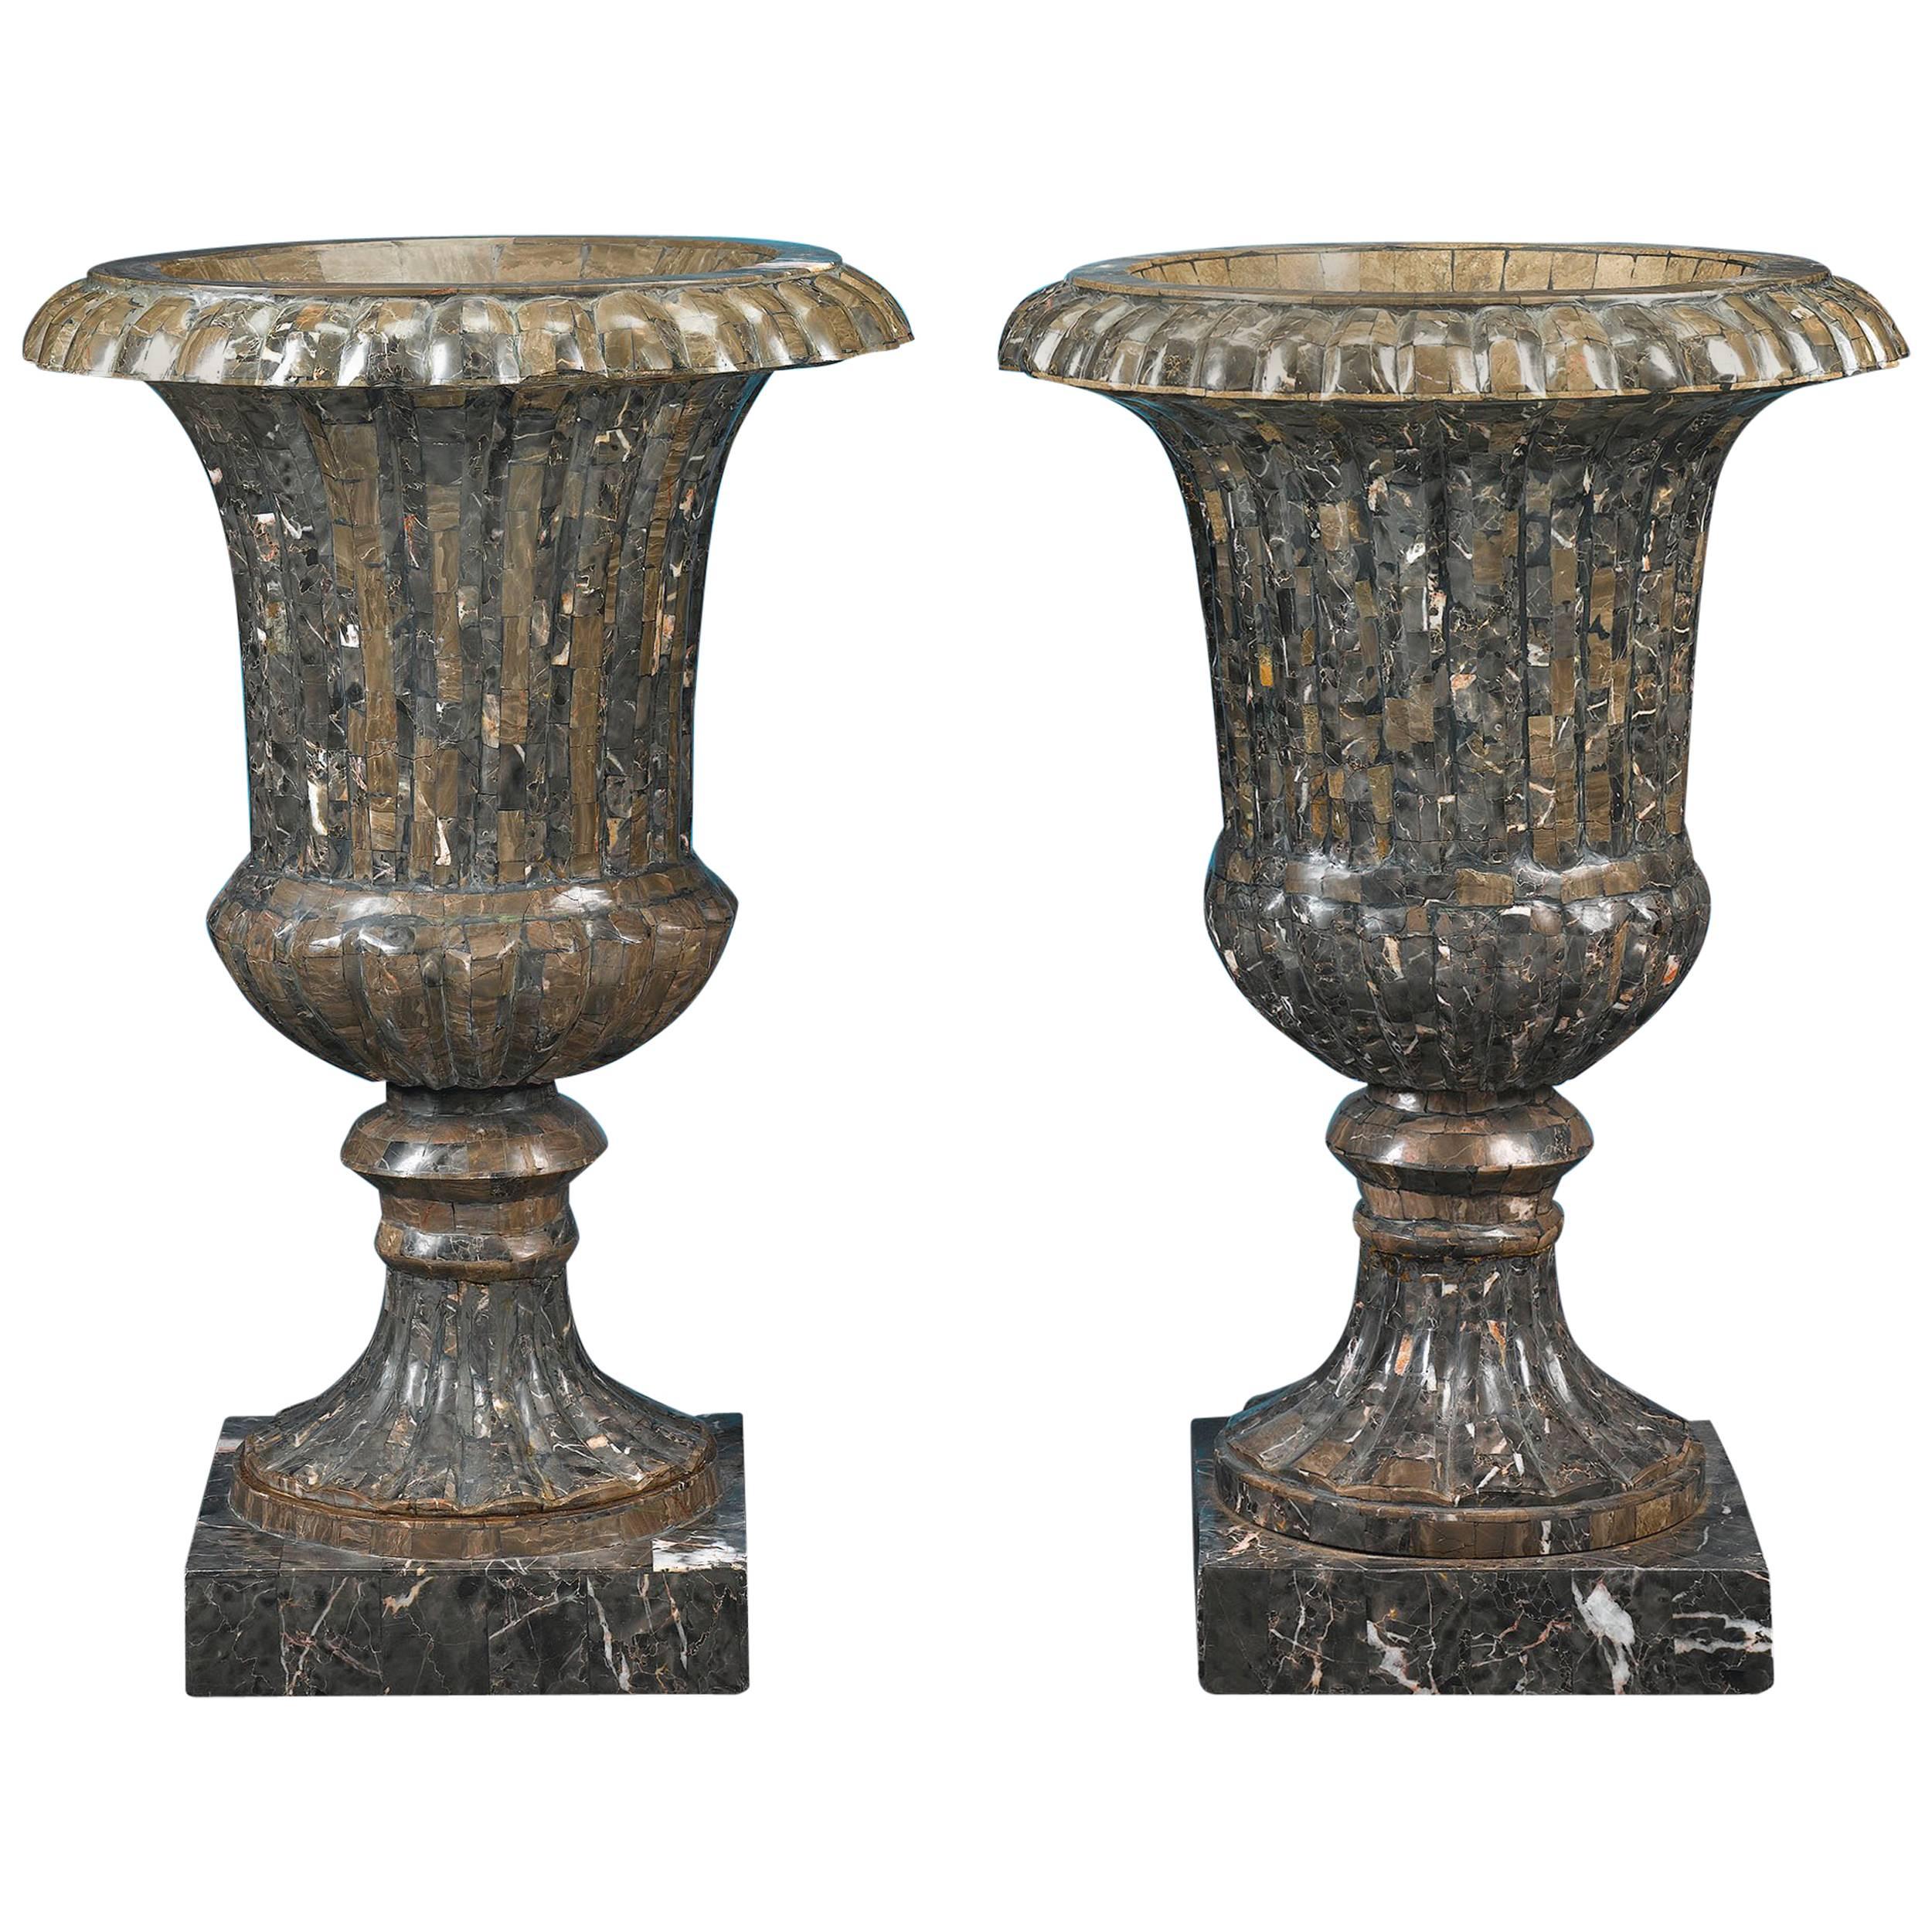 Neoclassical Marble Urns